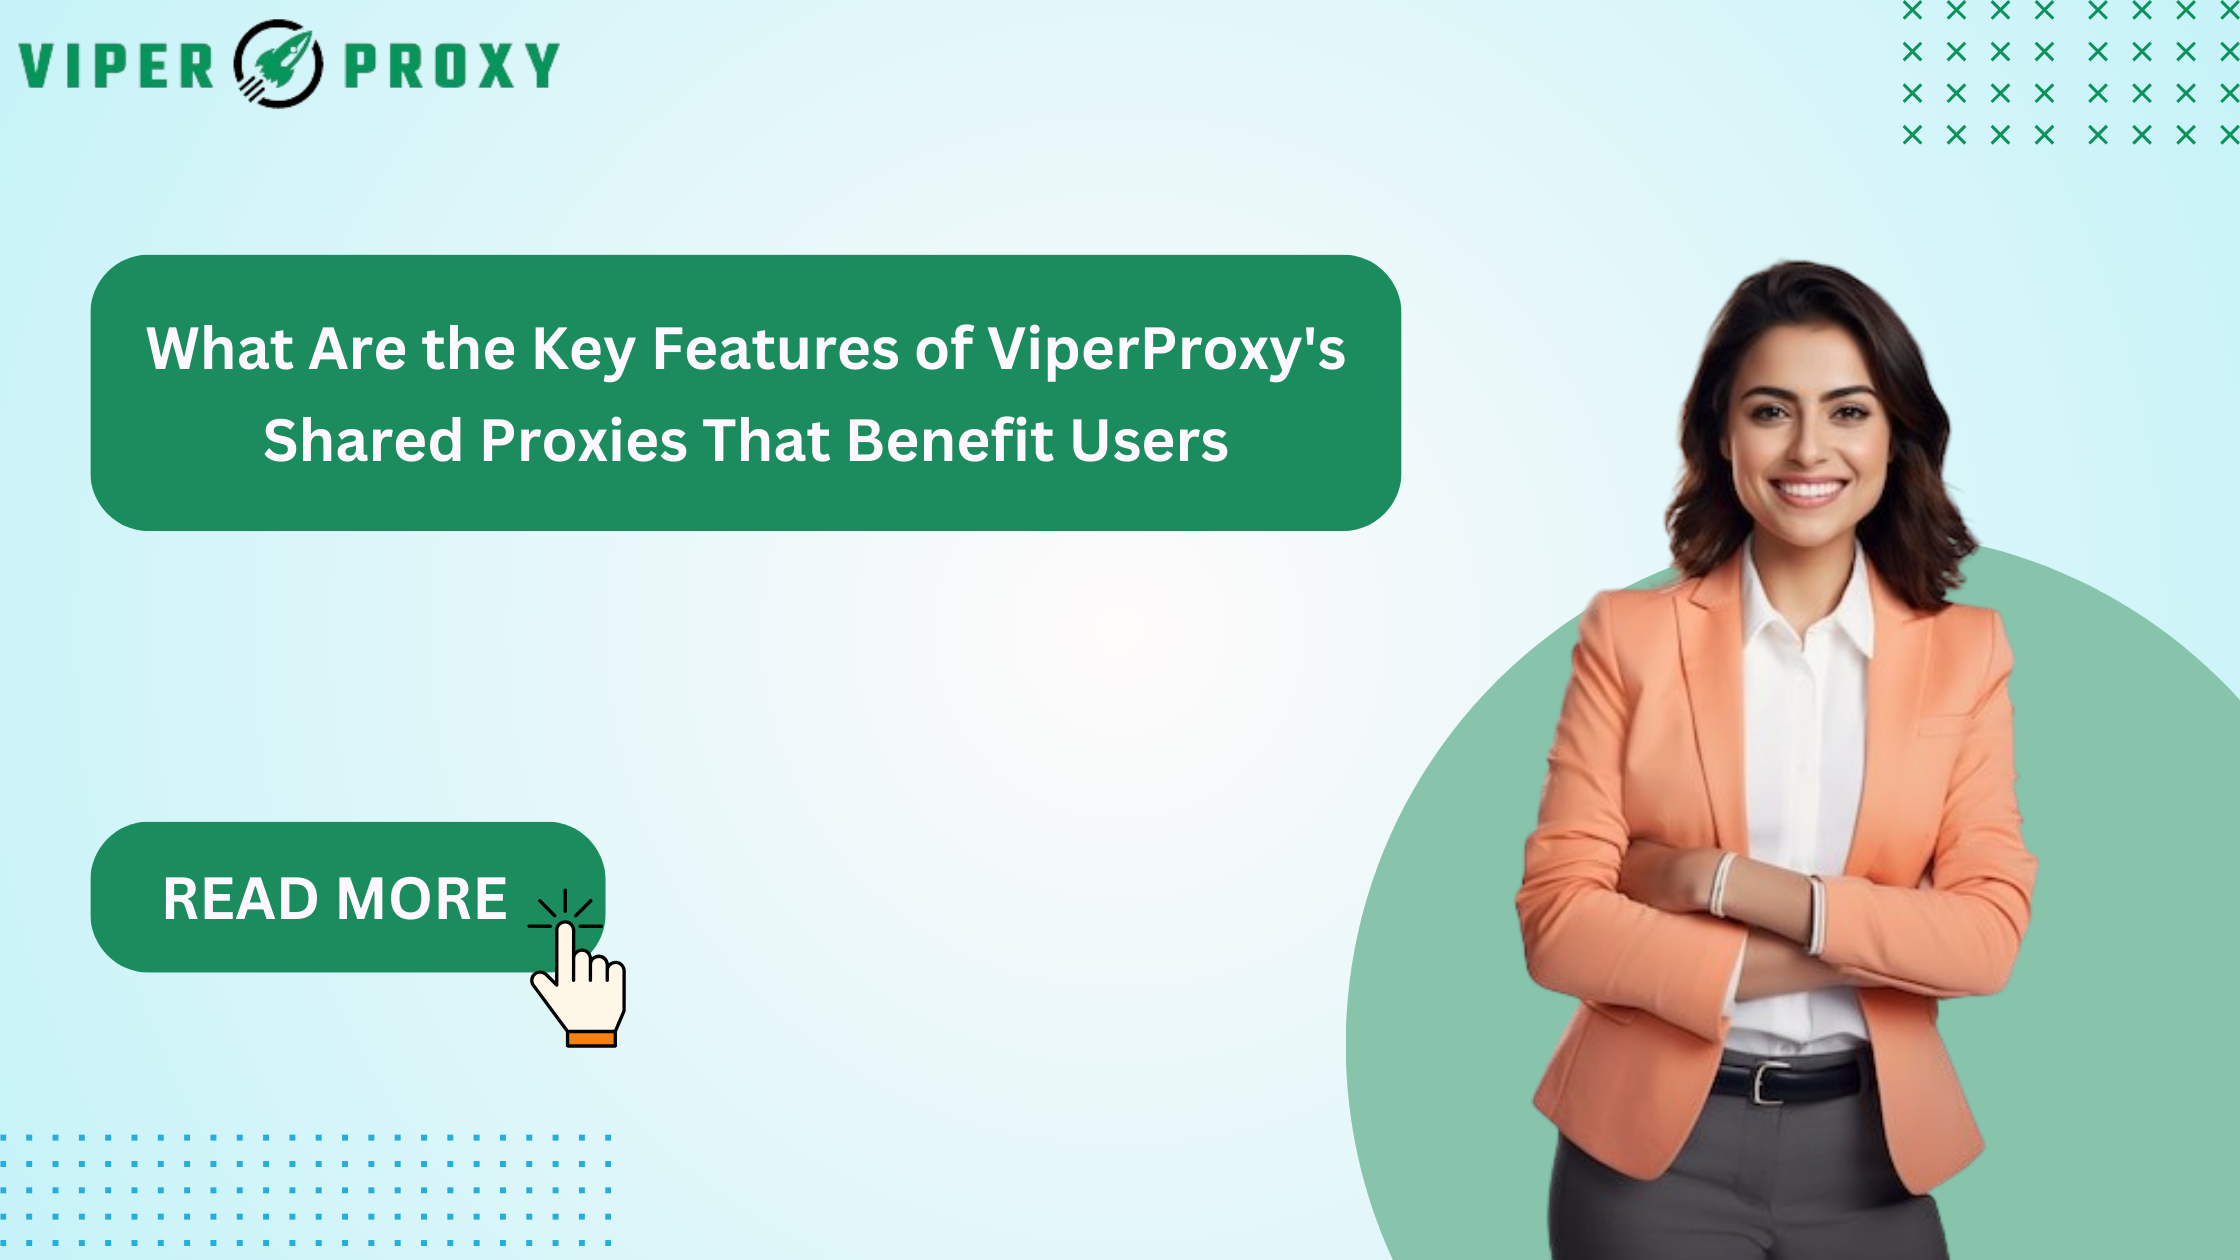 What Are the Key Features of ViperProxy’s Shared Proxies That Benefit Users